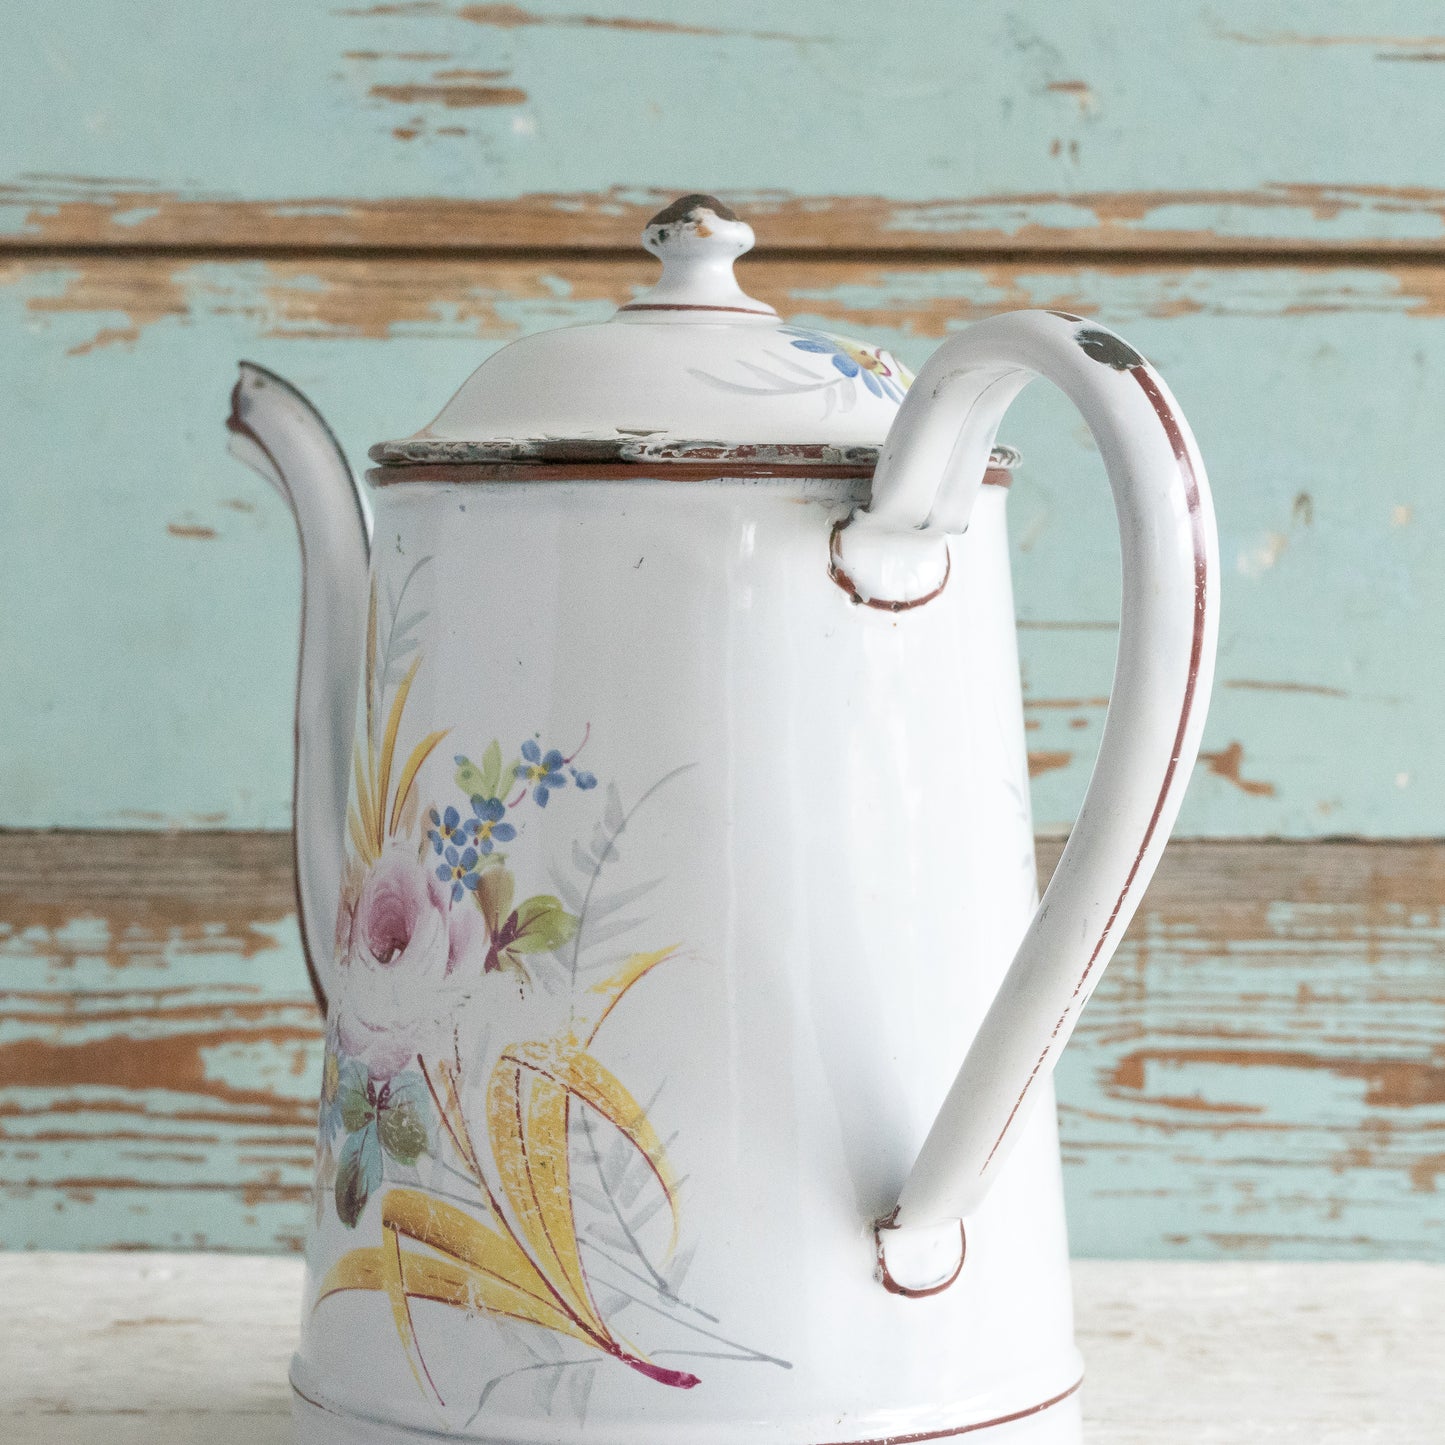 Vintage French Enamel Coffee Pot with Floral Detail